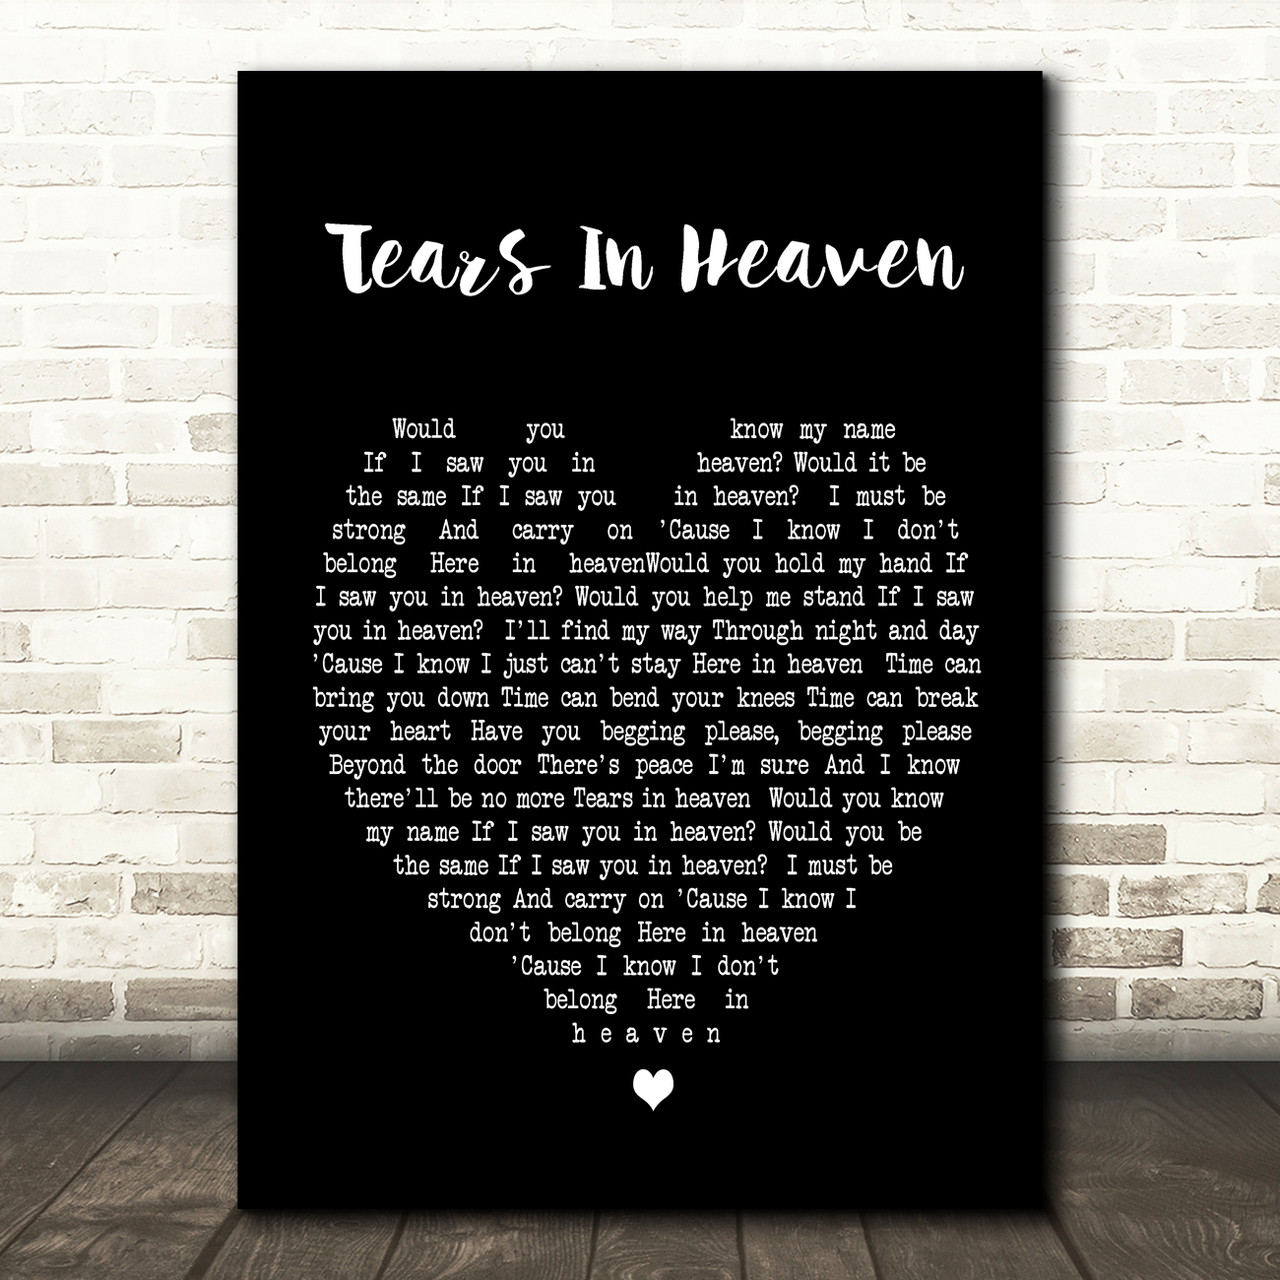 Tears In Heaven by Eric Clapton Vintage Song Lyrics on Parchment